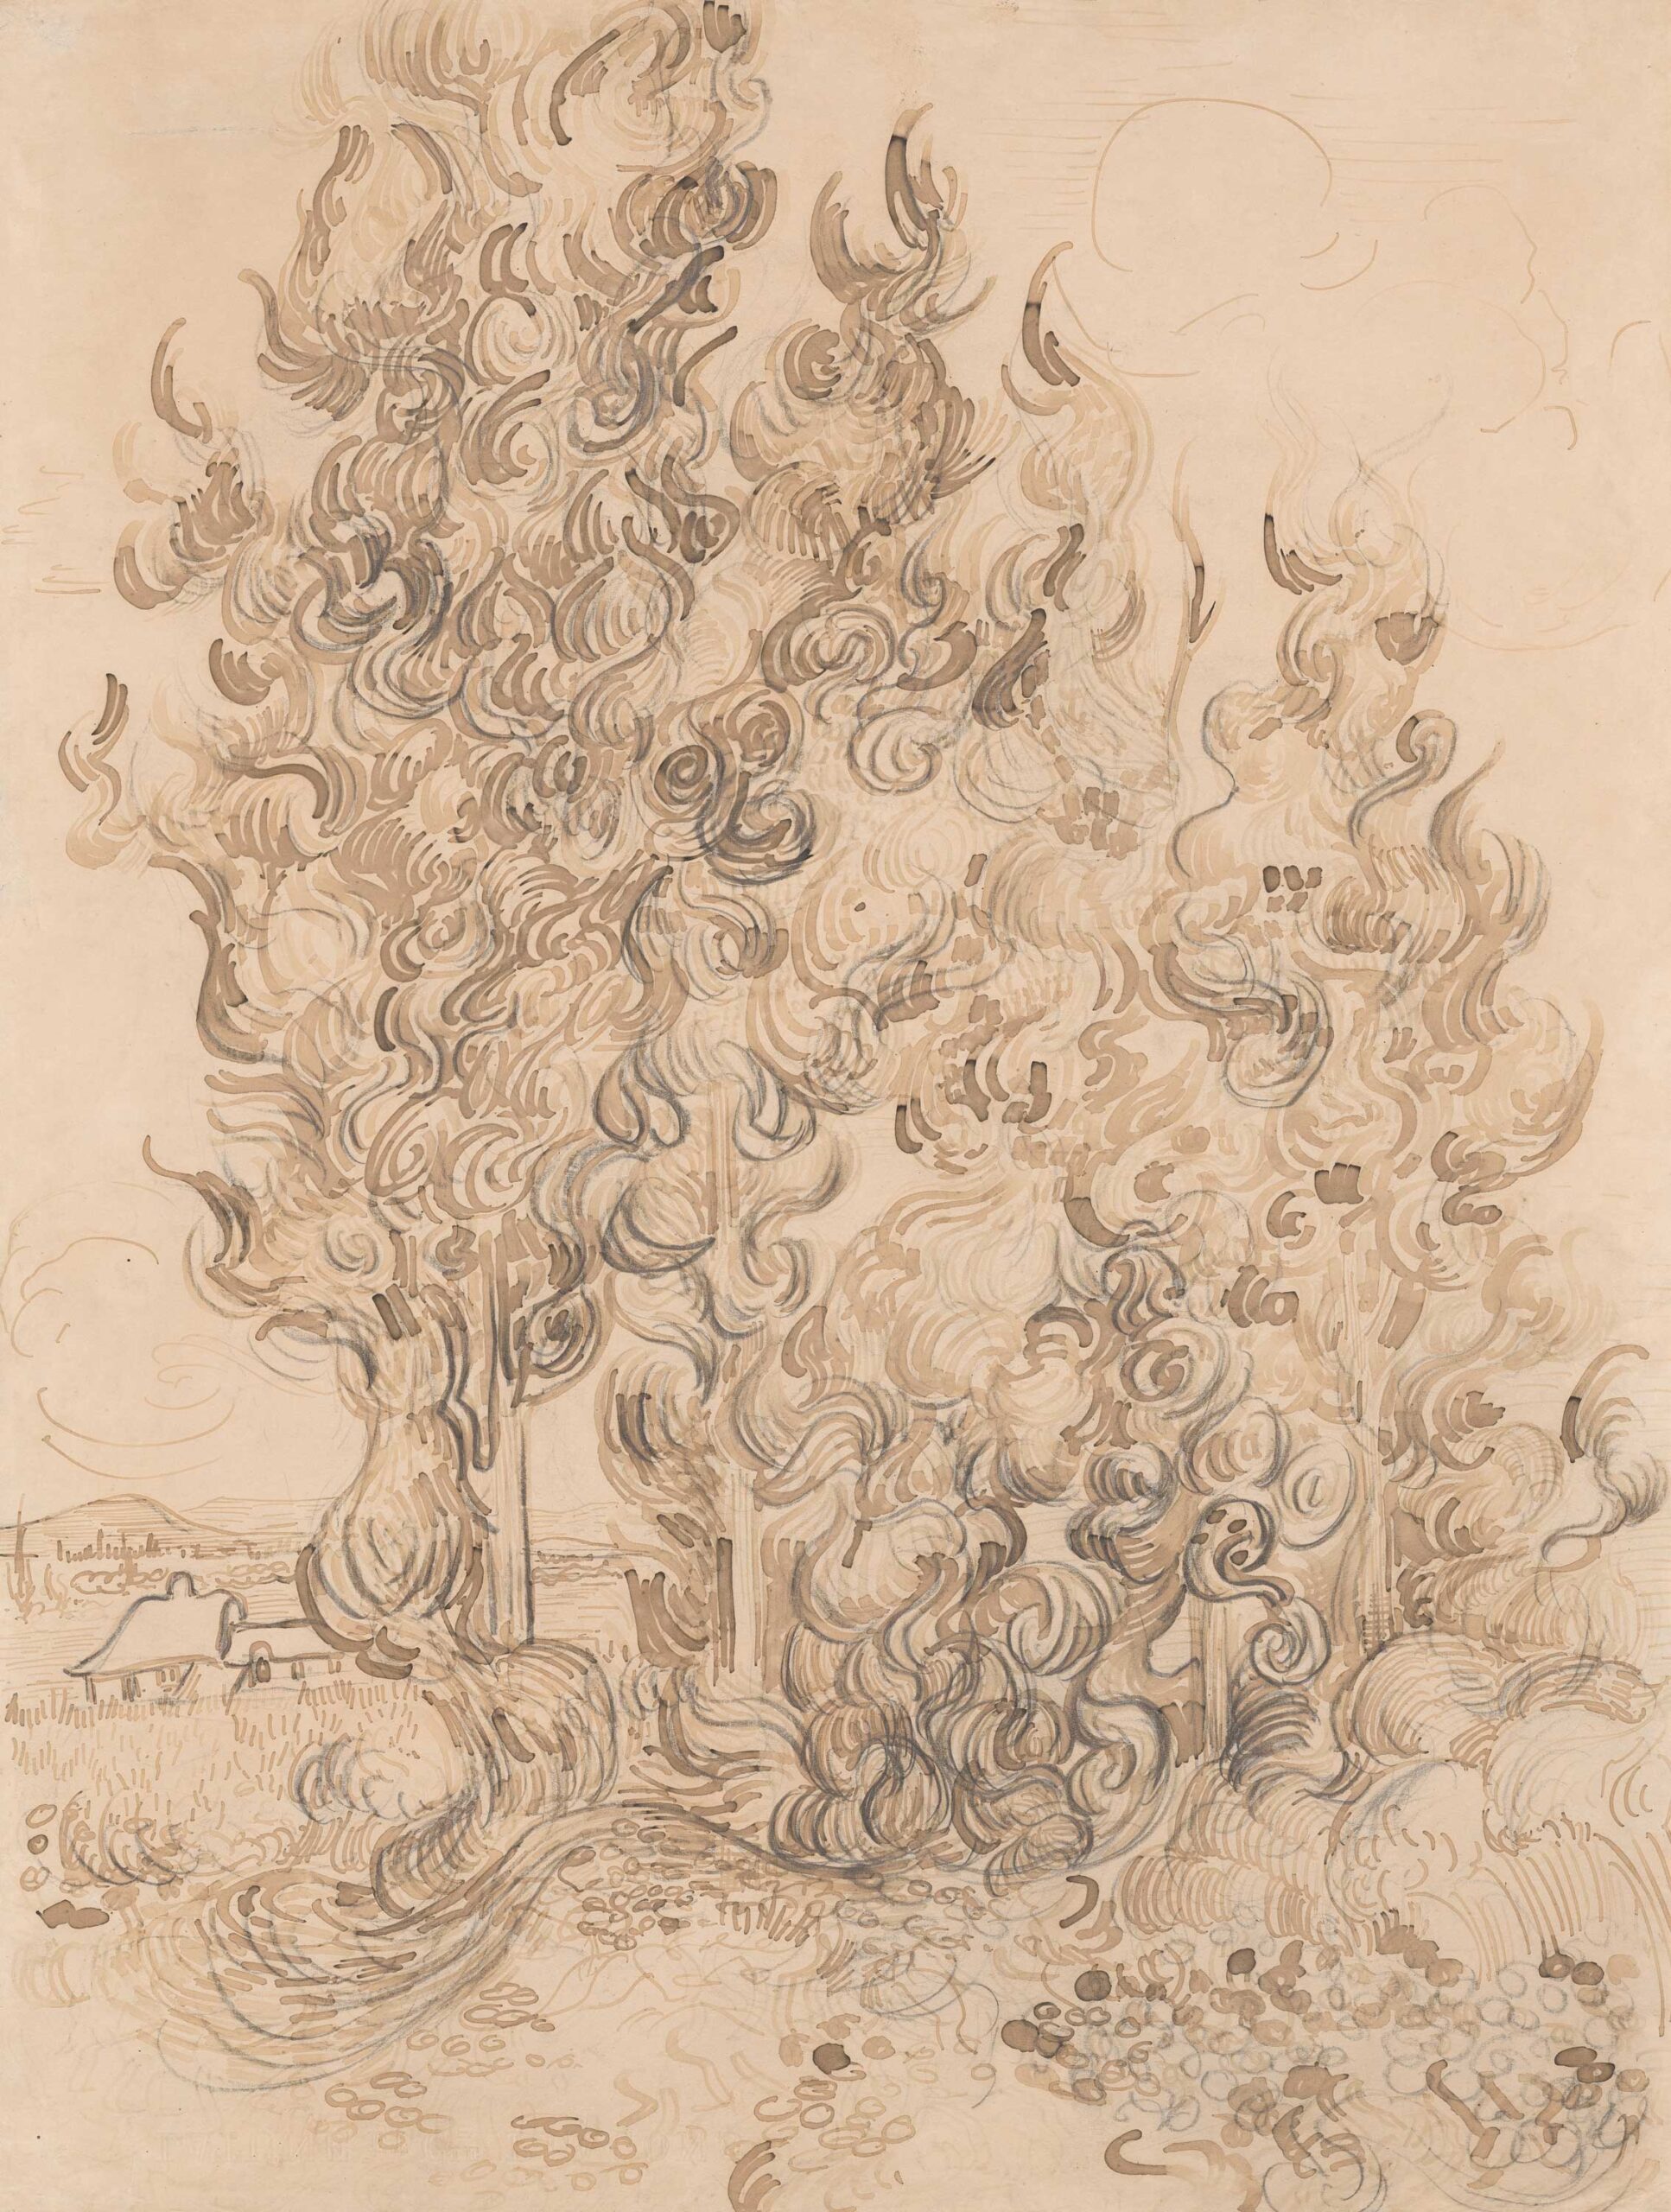 Vincent van Gogh, "Cypresses," June 1889, Pen and reed pen and inks and graphite on wove paper, 24 5/8 x 18 1/4 in. (62.5 x 46.4 cm), The Art Institute of Chicago, Gift of Robert Allerton (1927.543) Photo: The Art Institute of Chicago / Art Resource, NY